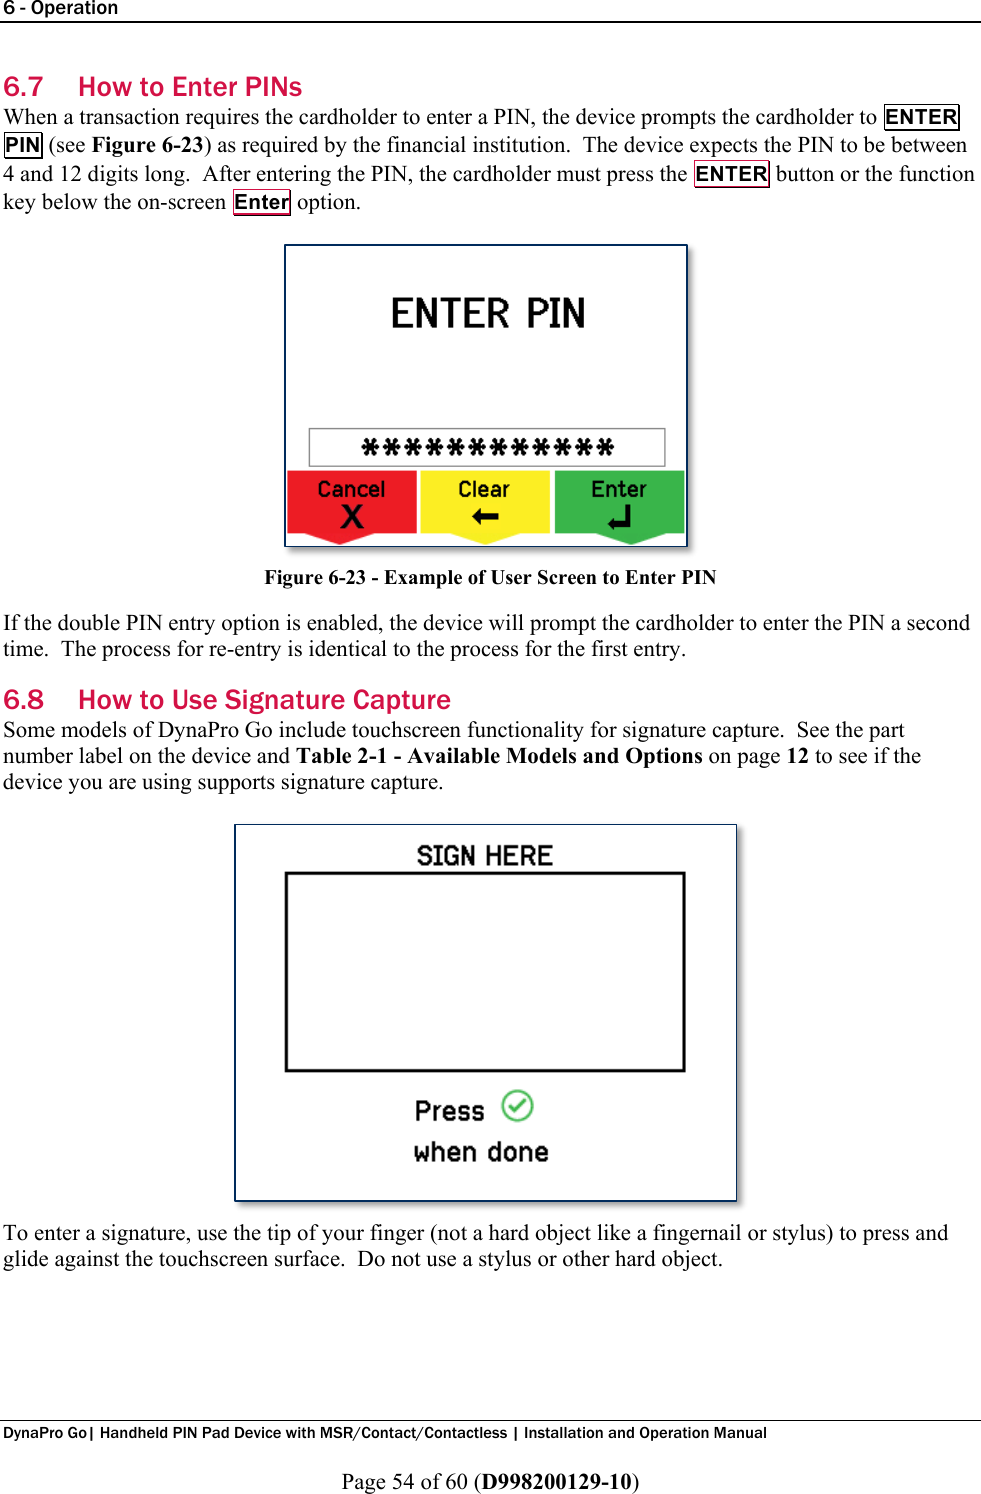 6 - Operation  DynaPro Go| Handheld PIN Pad Device with MSR/Contact/Contactless | Installation and Operation Manual  Page 54 of 60 (D998200129-10) 6.7 How to Enter PINs When a transaction requires the cardholder to enter a PIN, the device prompts the cardholder to ENTER PIN (see Figure 6-23) as required by the financial institution.  The device expects the PIN to be between 4 and 12 digits long.  After entering the PIN, the cardholder must press the ENTER button or the function key below the on-screen Enter option.  Figure 6-23 - Example of User Screen to Enter PIN If the double PIN entry option is enabled, the device will prompt the cardholder to enter the PIN a second time.  The process for re-entry is identical to the process for the first entry. 6.8 How to Use Signature Capture Some models of DynaPro Go include touchscreen functionality for signature capture.  See the part number label on the device and Table 2-1 - Available Models and Options on page 12 to see if the device you are using supports signature capture.  To enter a signature, use the tip of your finger (not a hard object like a fingernail or stylus) to press and glide against the touchscreen surface.  Do not use a stylus or other hard object.     